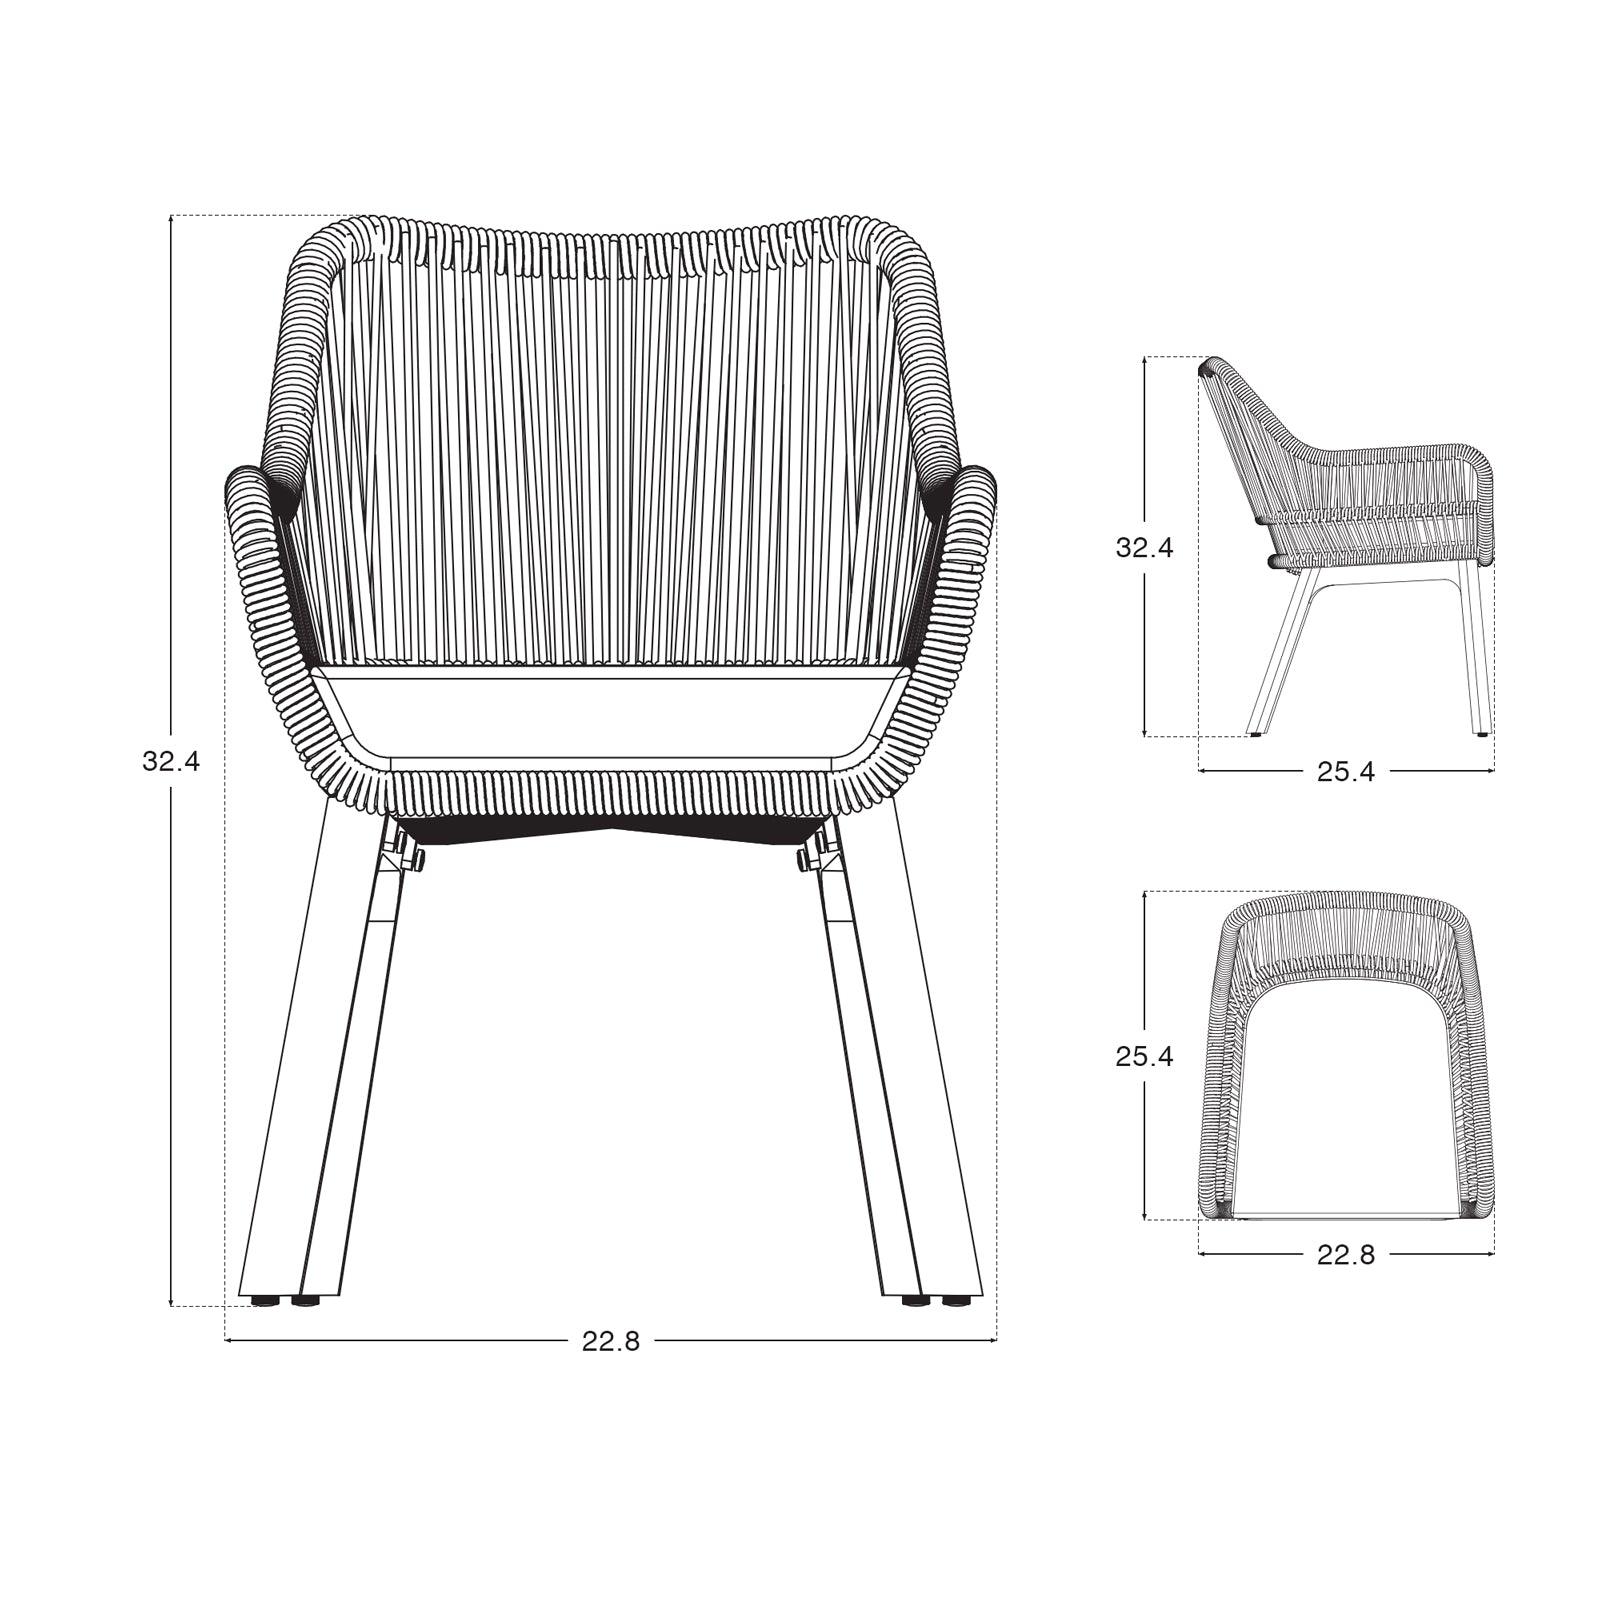 Natural Collection-Coronado Dining Arm Chairs,Dimension information, Length, height, width data information- Sunsitt Signature